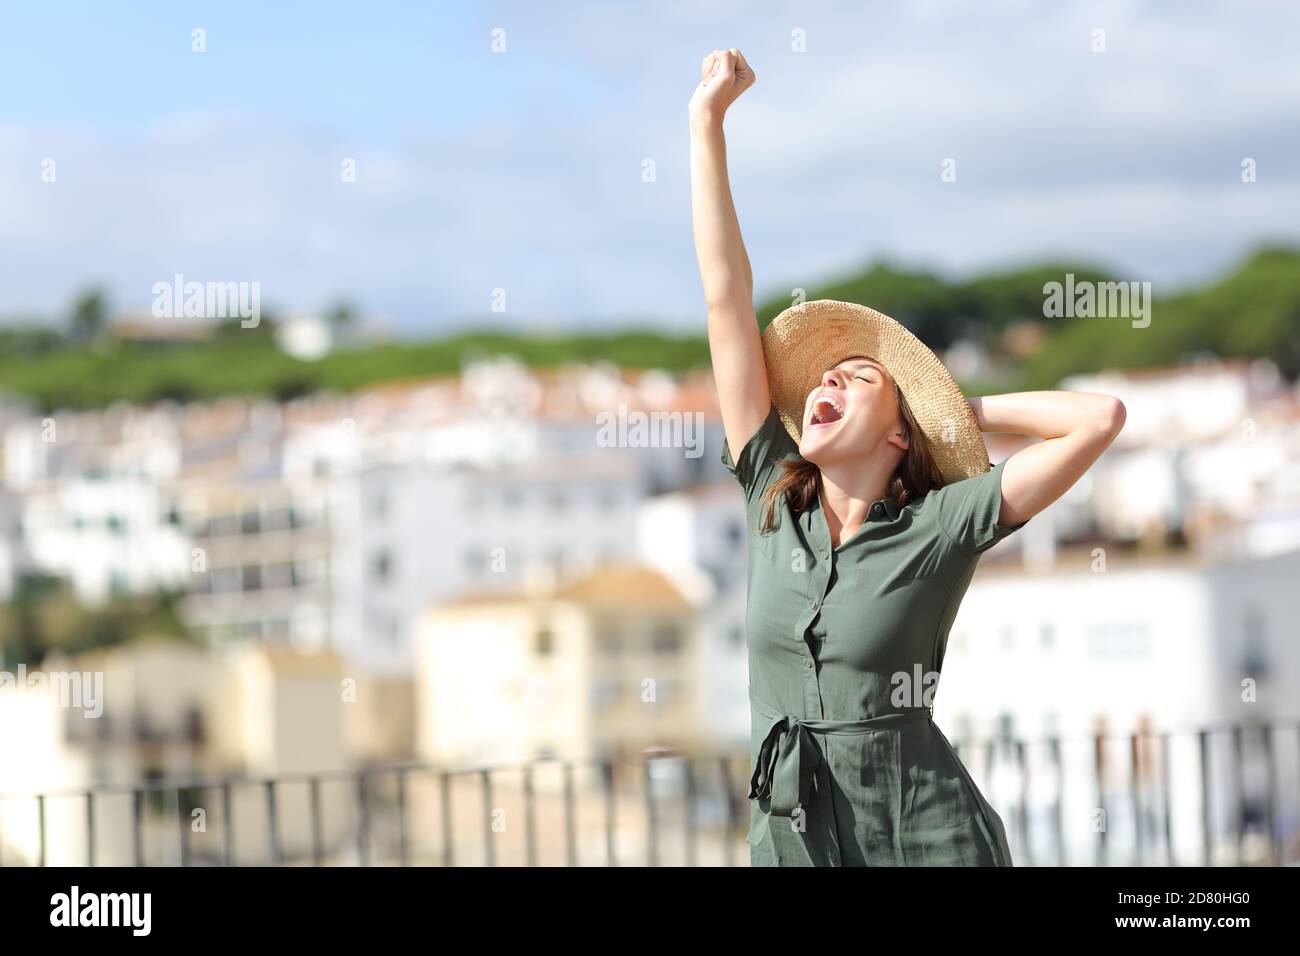 Excited tourist raising arm on summer vacation in a rural town a sunny day Stock Photo